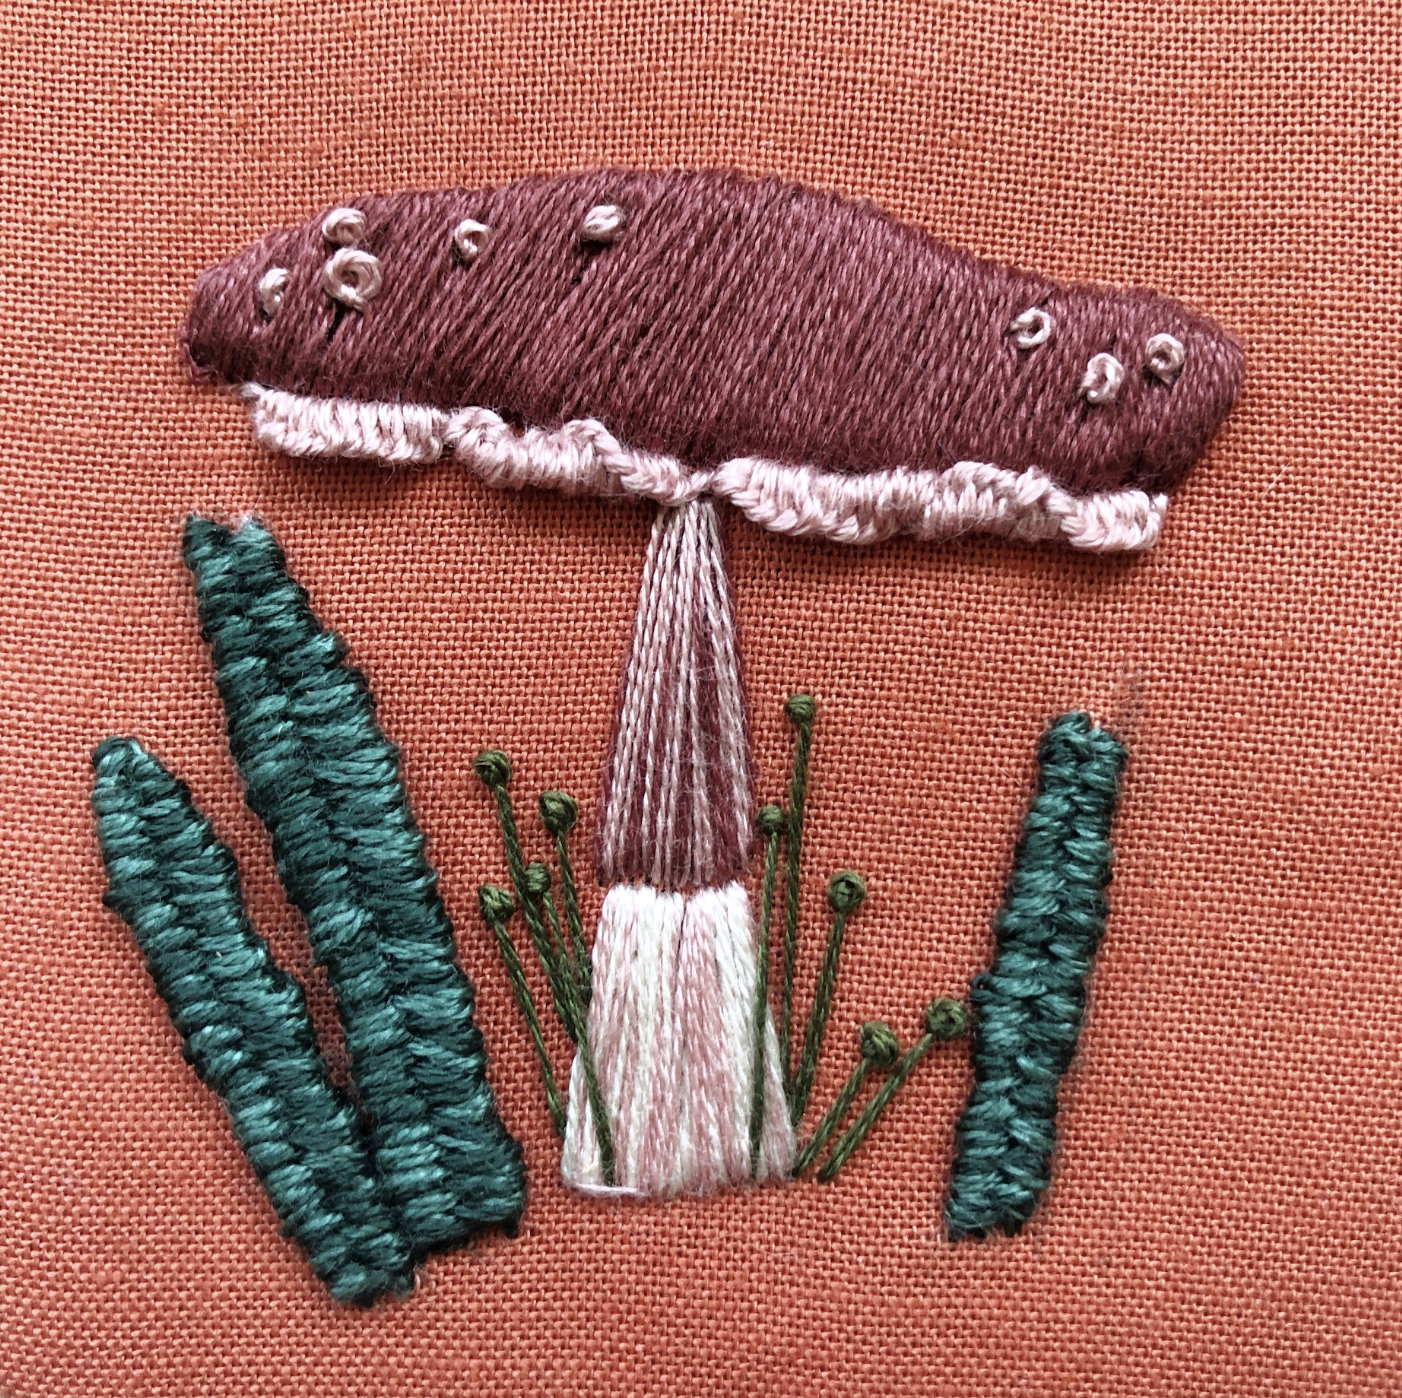 Mushroom Woodland Blackwork Embroidery Kit by Stitched Stories, 8 in, Cotton